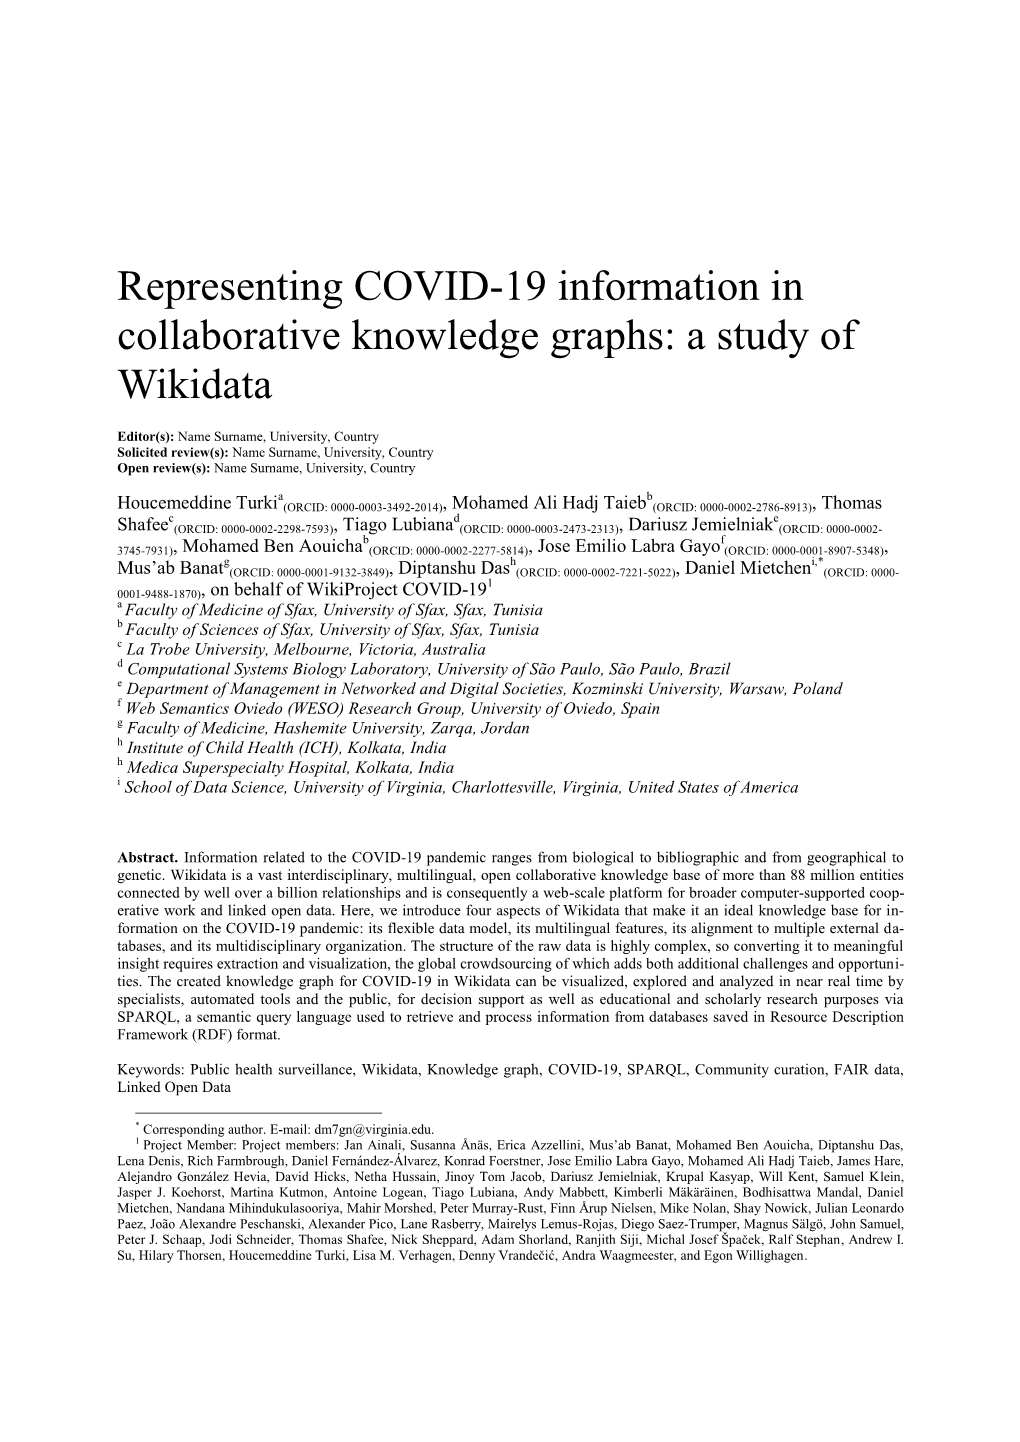 Representing COVID-19 Information in Collaborative Knowledge Graphs: a Study of Wikidata